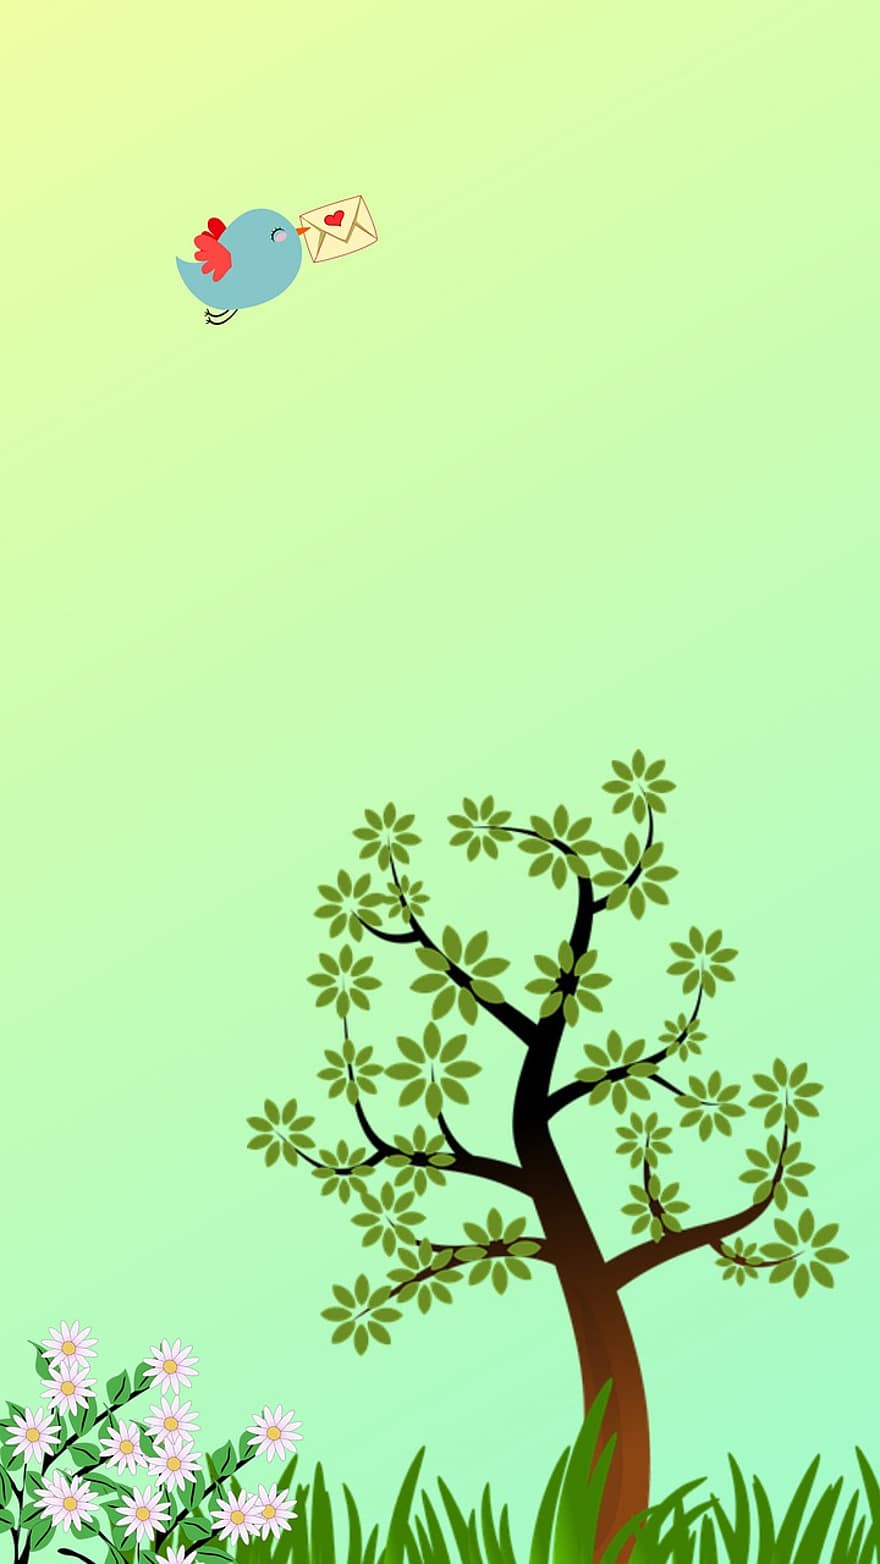 Bird, Love Letter, Drawing, Sketch, Nature, Scenery, Spring, Iphone Wallpaper, vector, illustration, grass